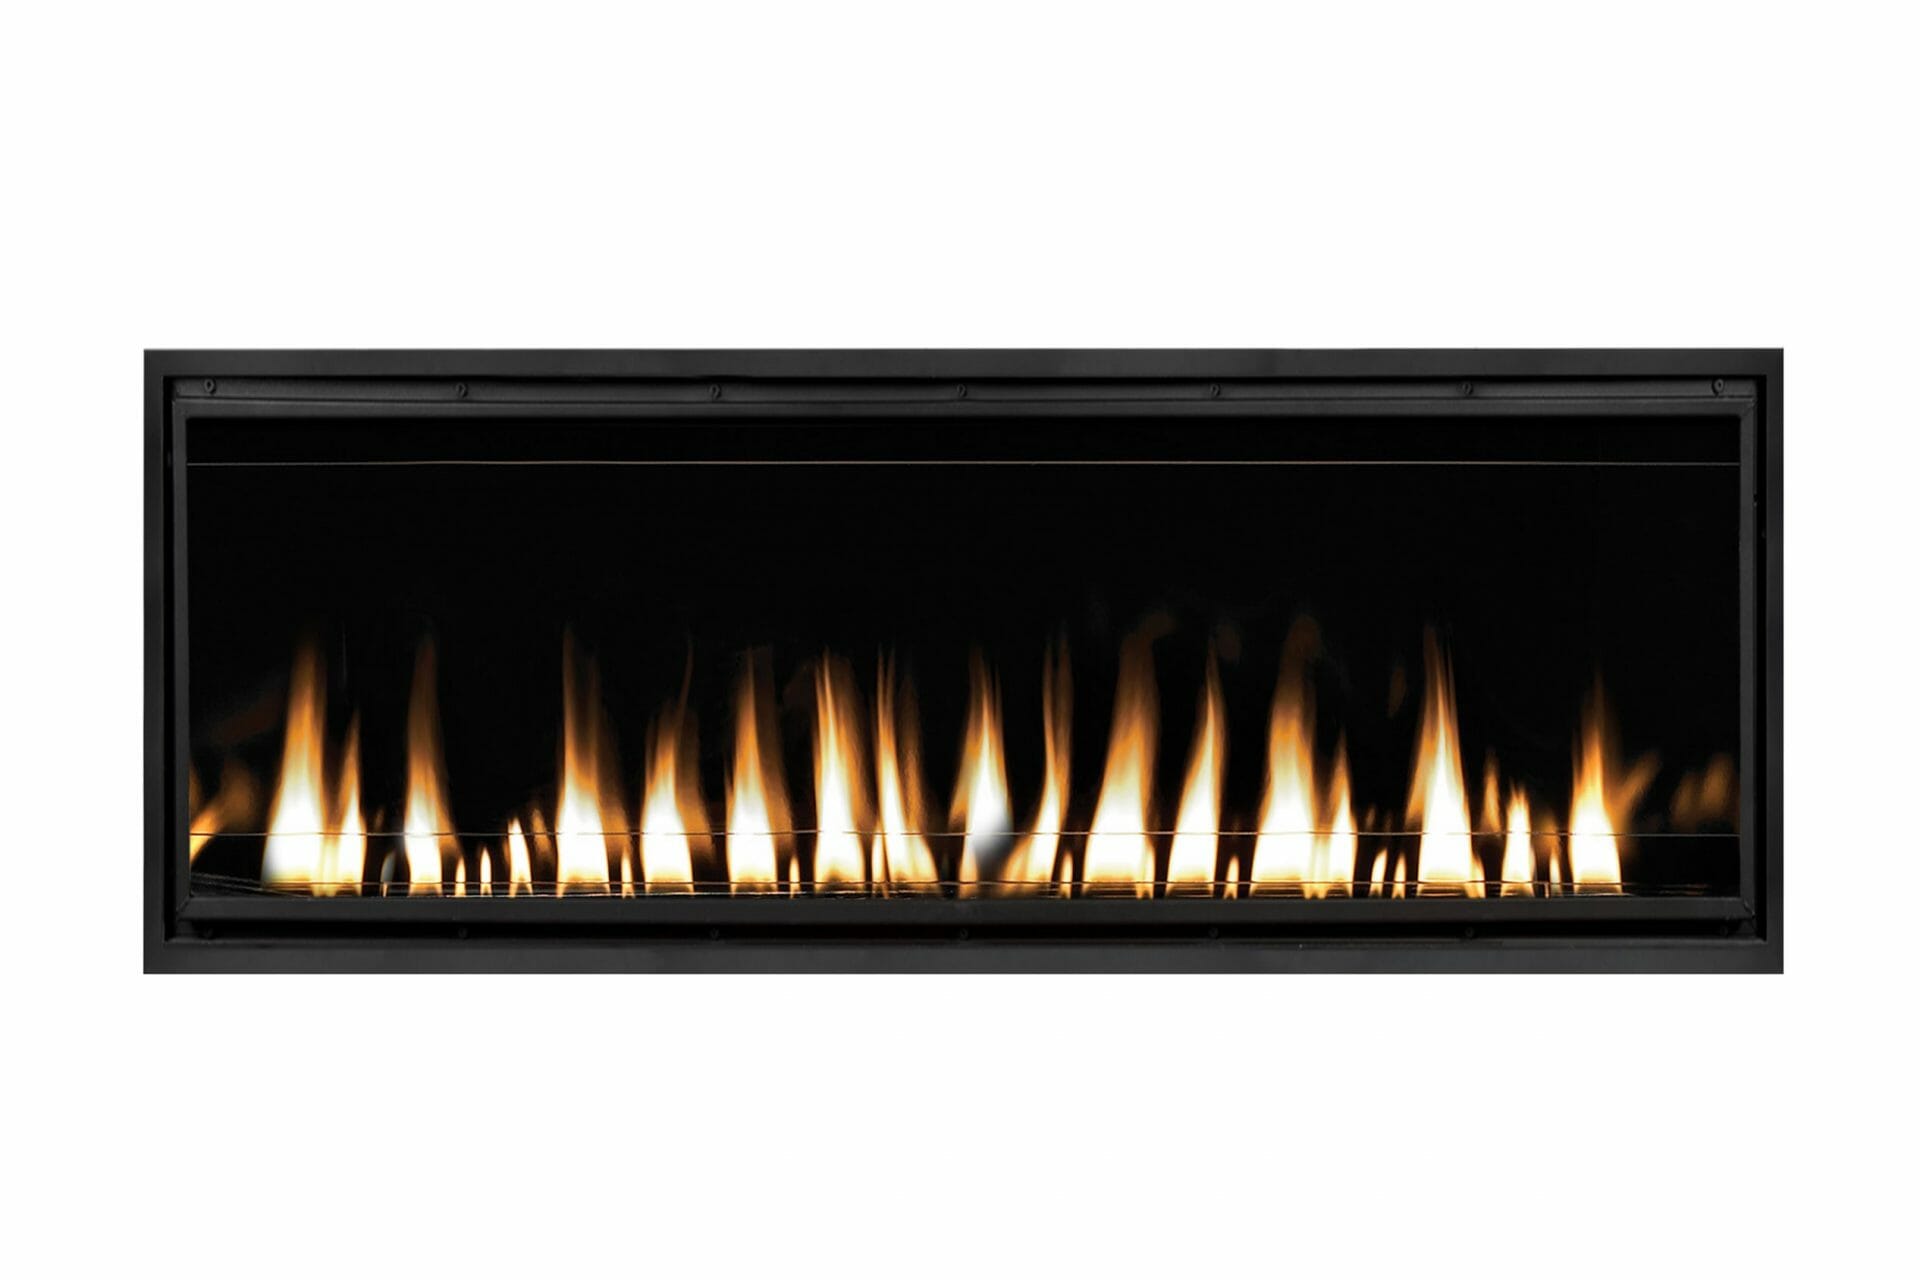 Open the Fireplace Insert